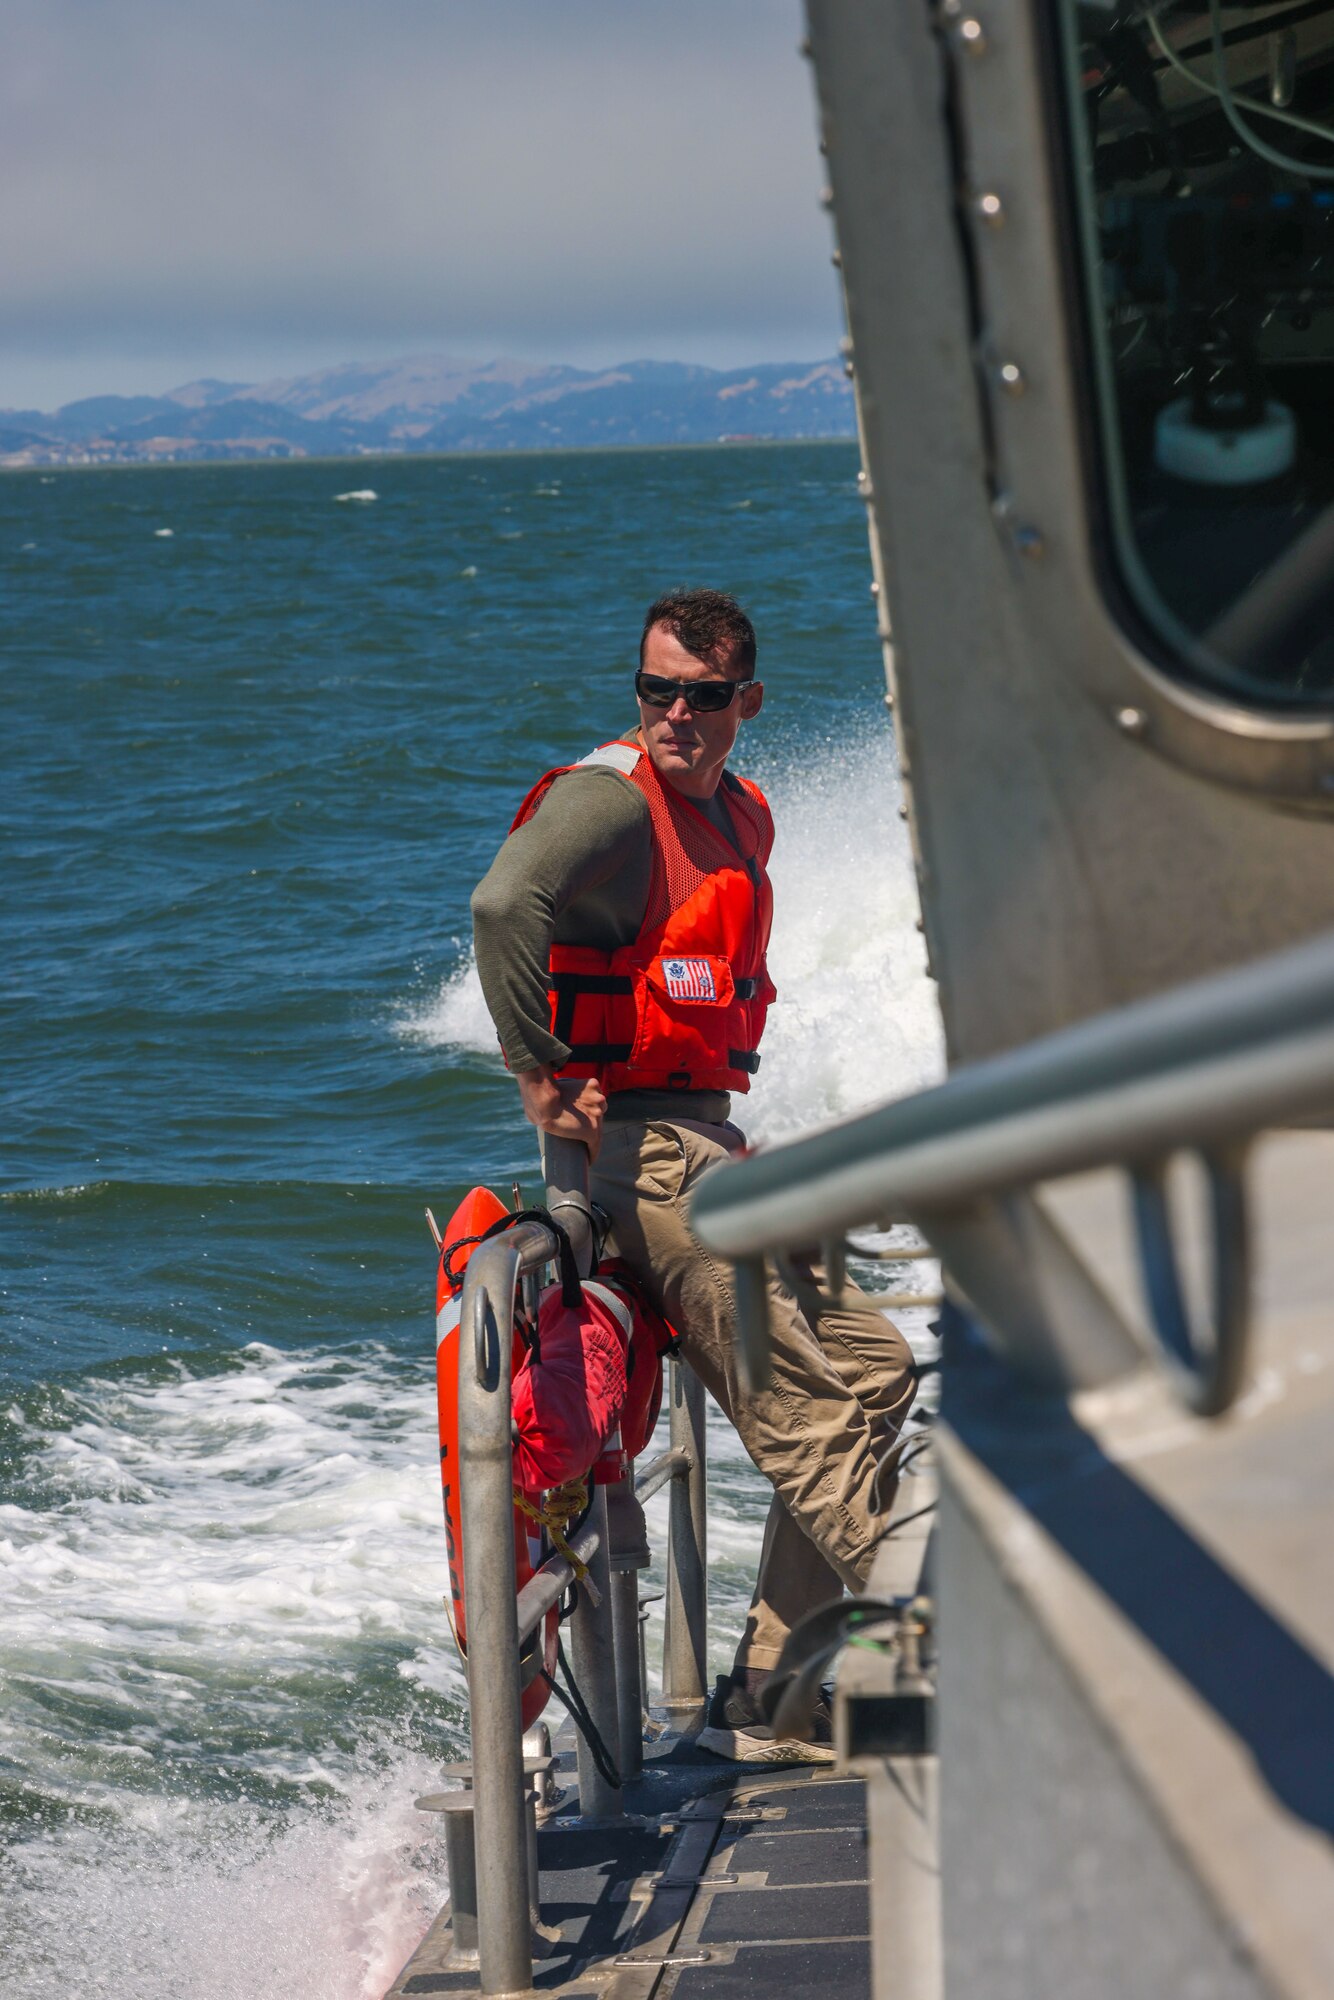 U.S. Air Force Capt. Dustin Bennett, Physicians Assistant, 9th Health Care Operations Squadron, fills the role of medic during the Search and Rescue Exercise (SAREX) in the San Francisco Bay, California Aug. 17, 2023.